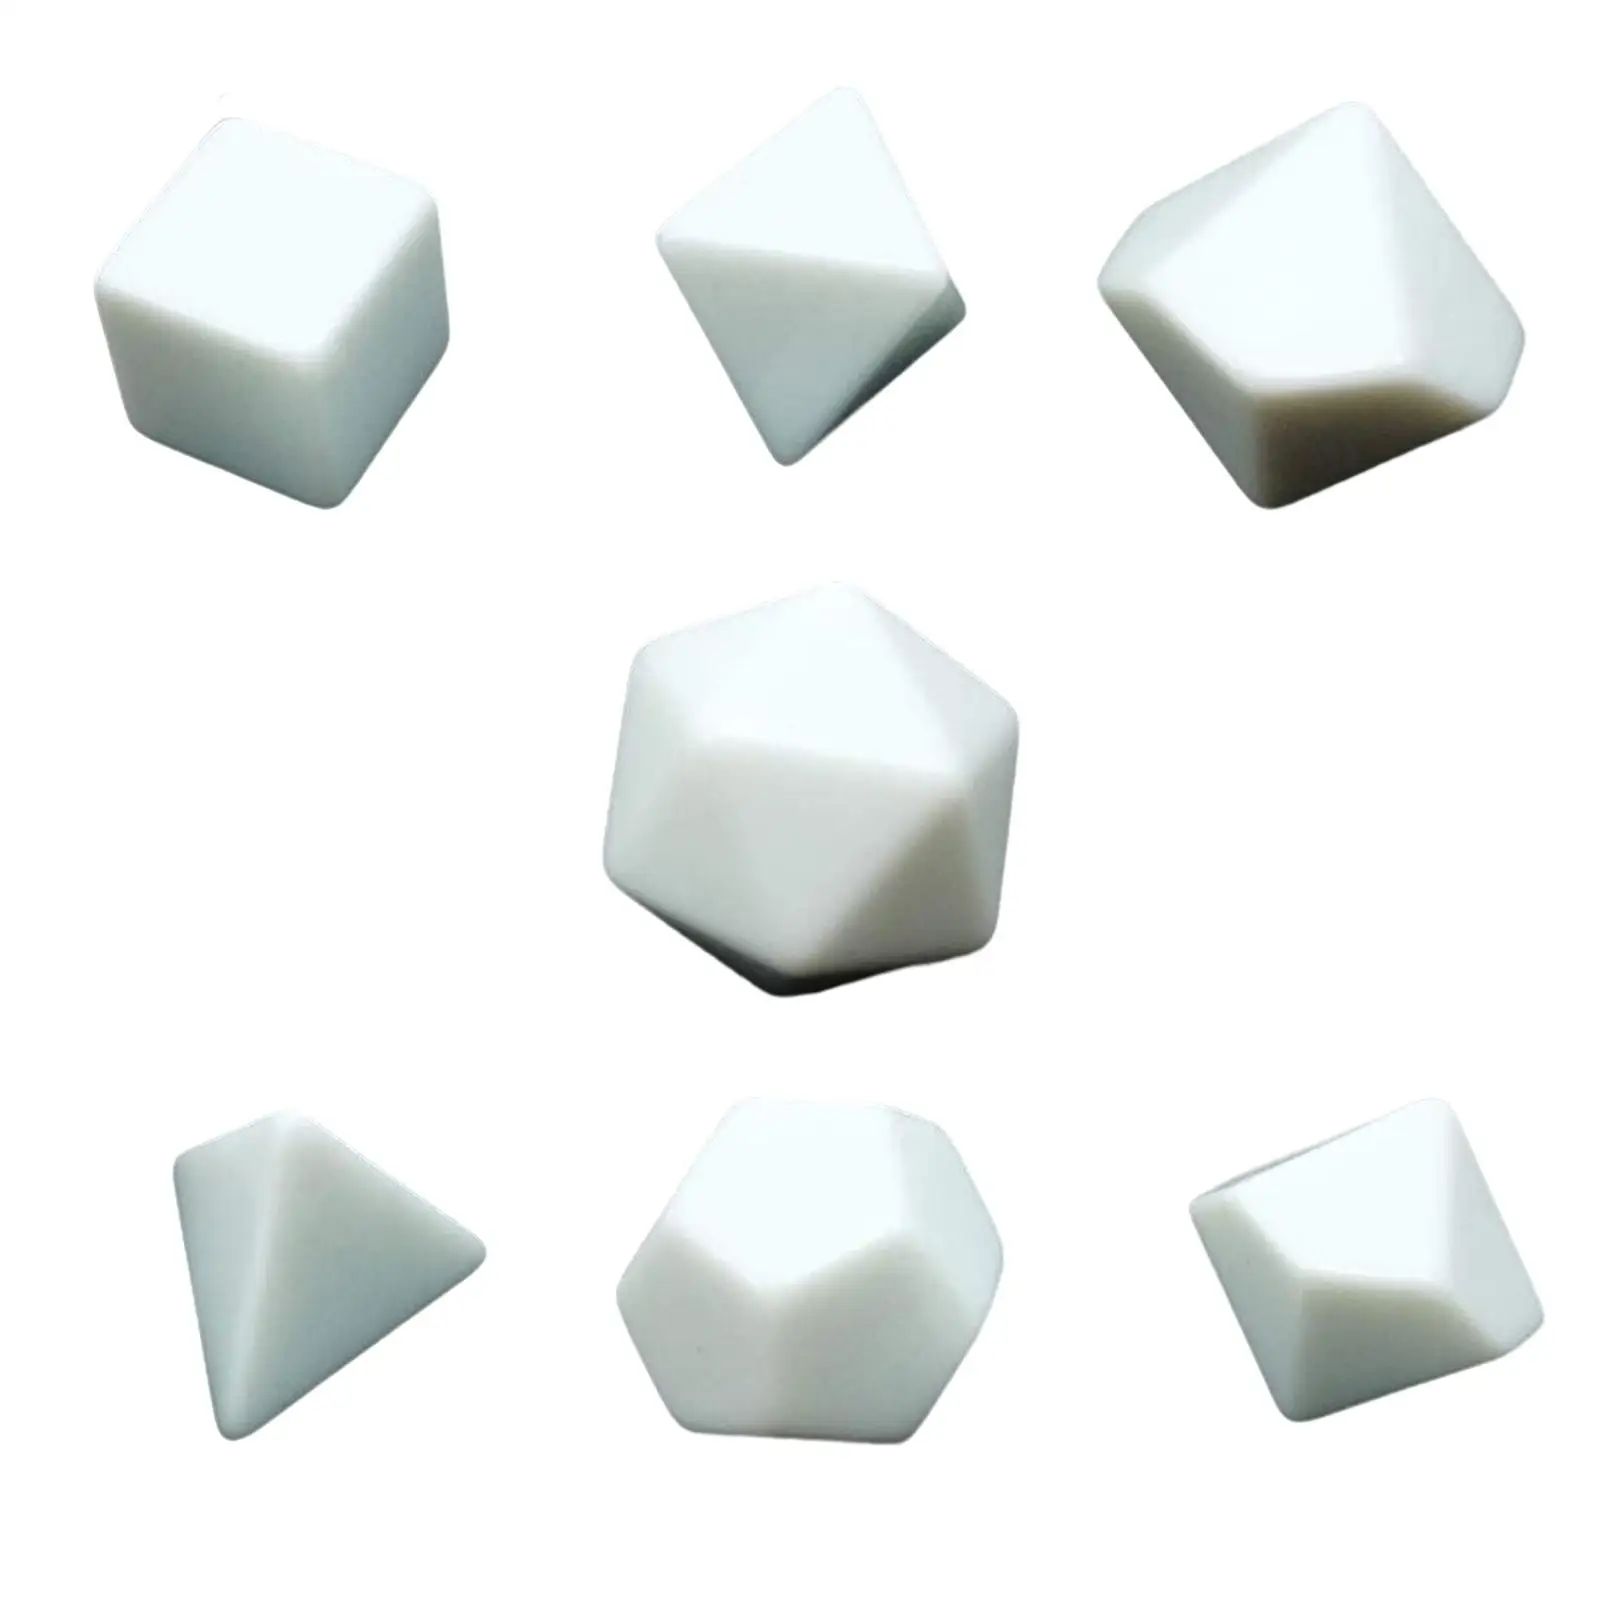 7 Pieces Acrylic Blank Polyhedral RPG Dices Set for Creative Painting, 